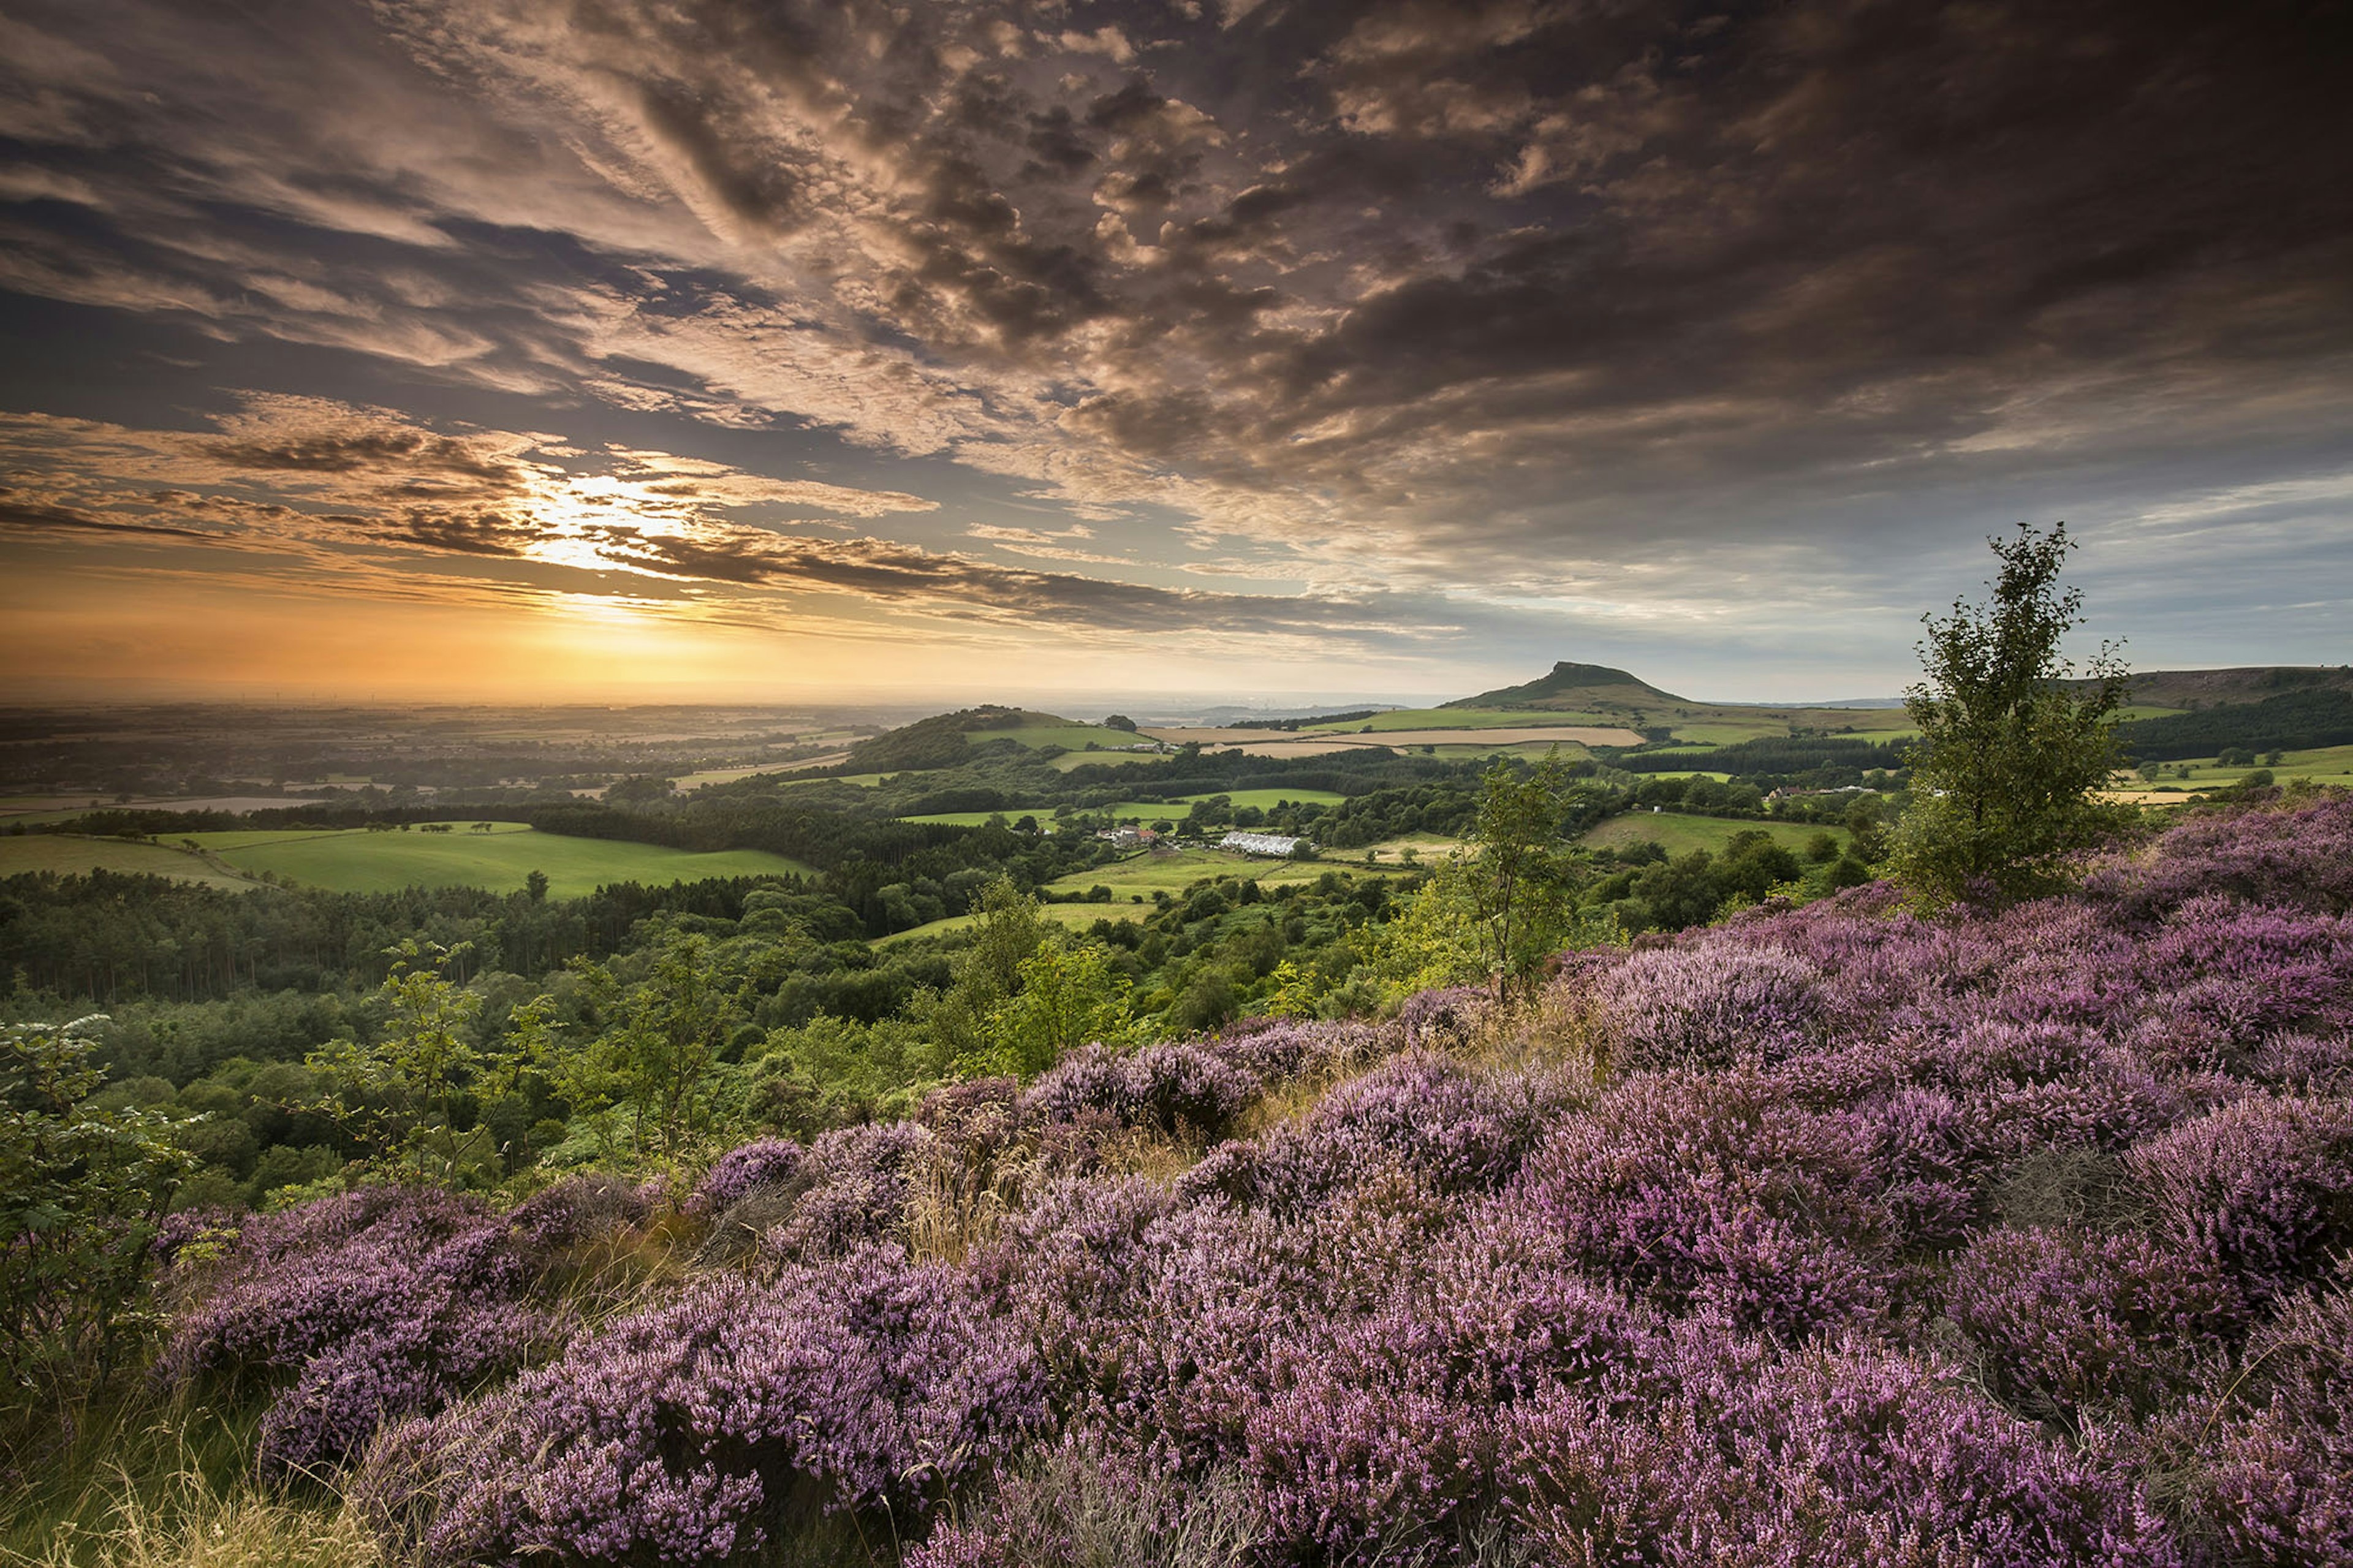 Sunst and Heather Roseberry Topping from Gribdale, North York Moors National Park